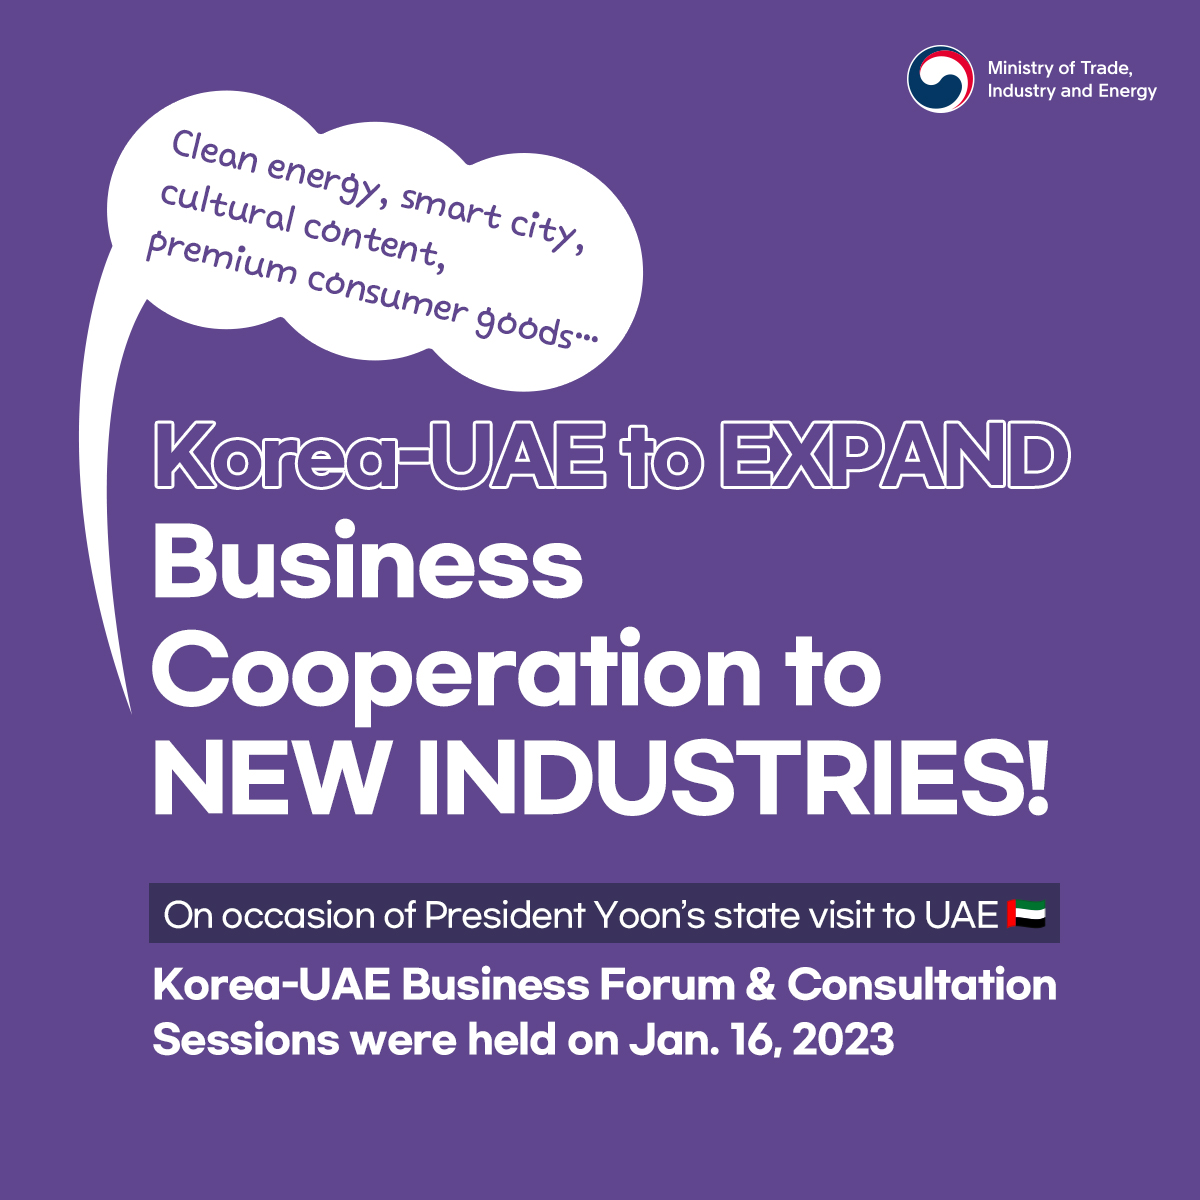 Korea and UAE expand business cooperation to new industries!